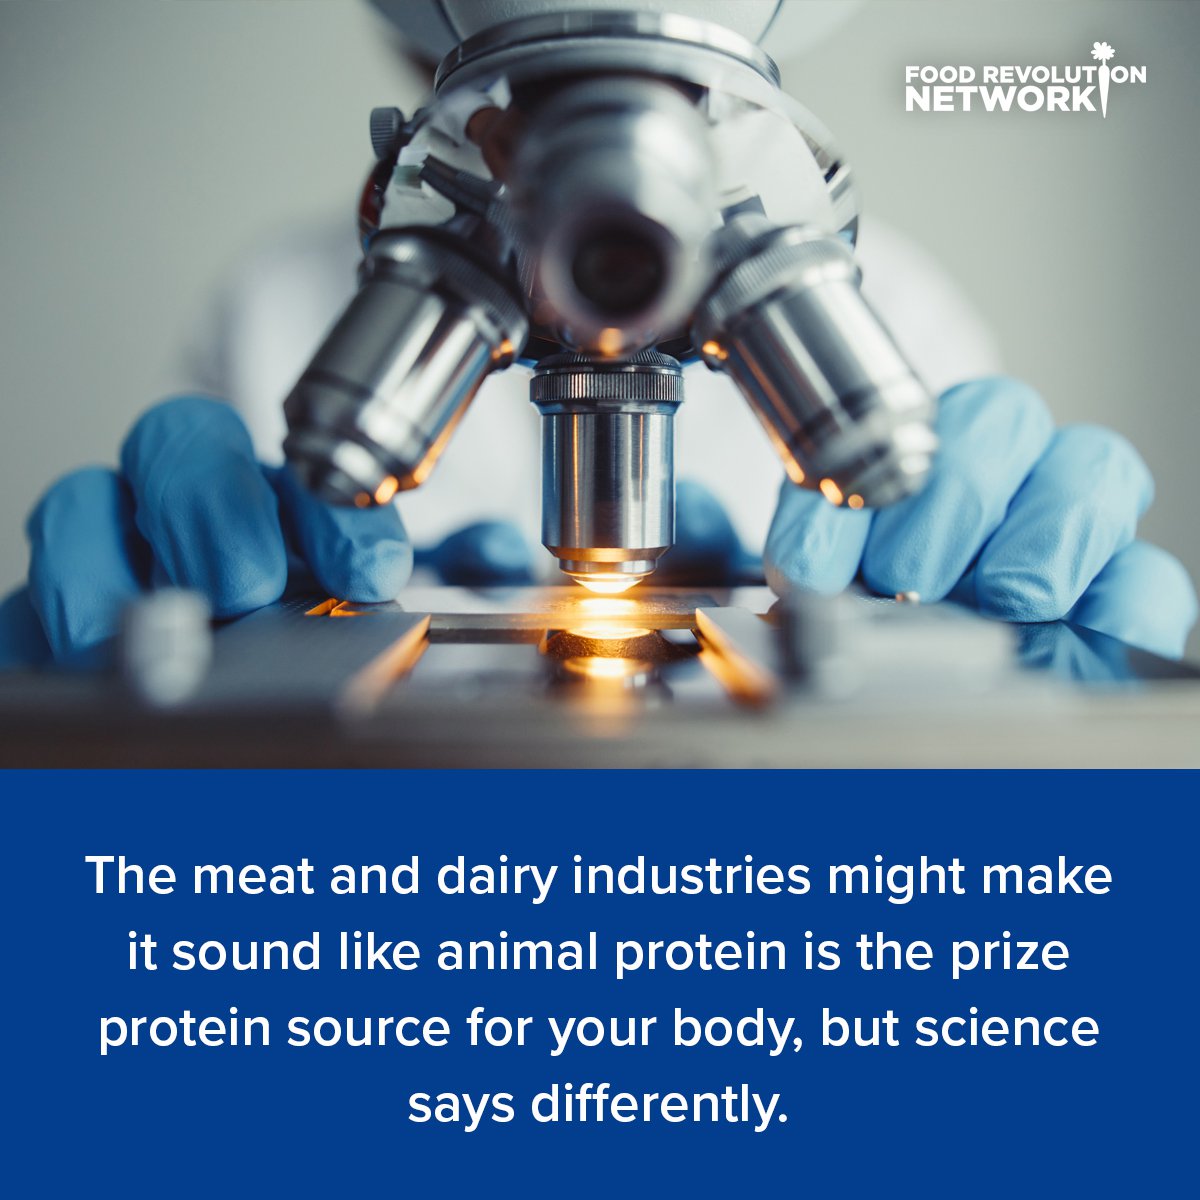 The meat and dairy industries might make it sound like animal protein is the prize protein source for your body, but science says differently.